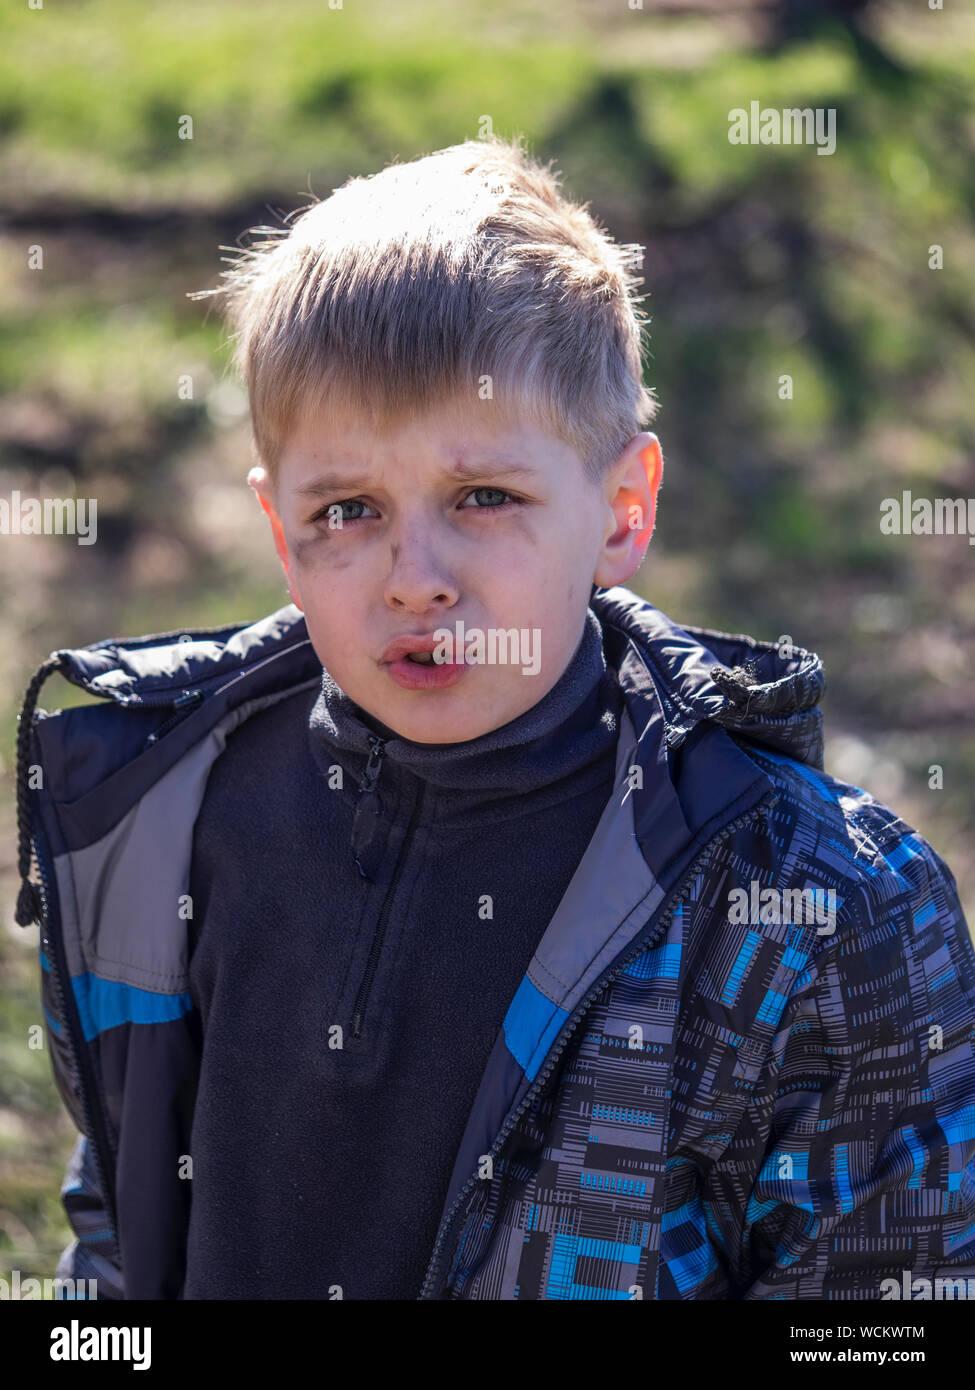 Boy With Soot Smear On Face Stock Photo